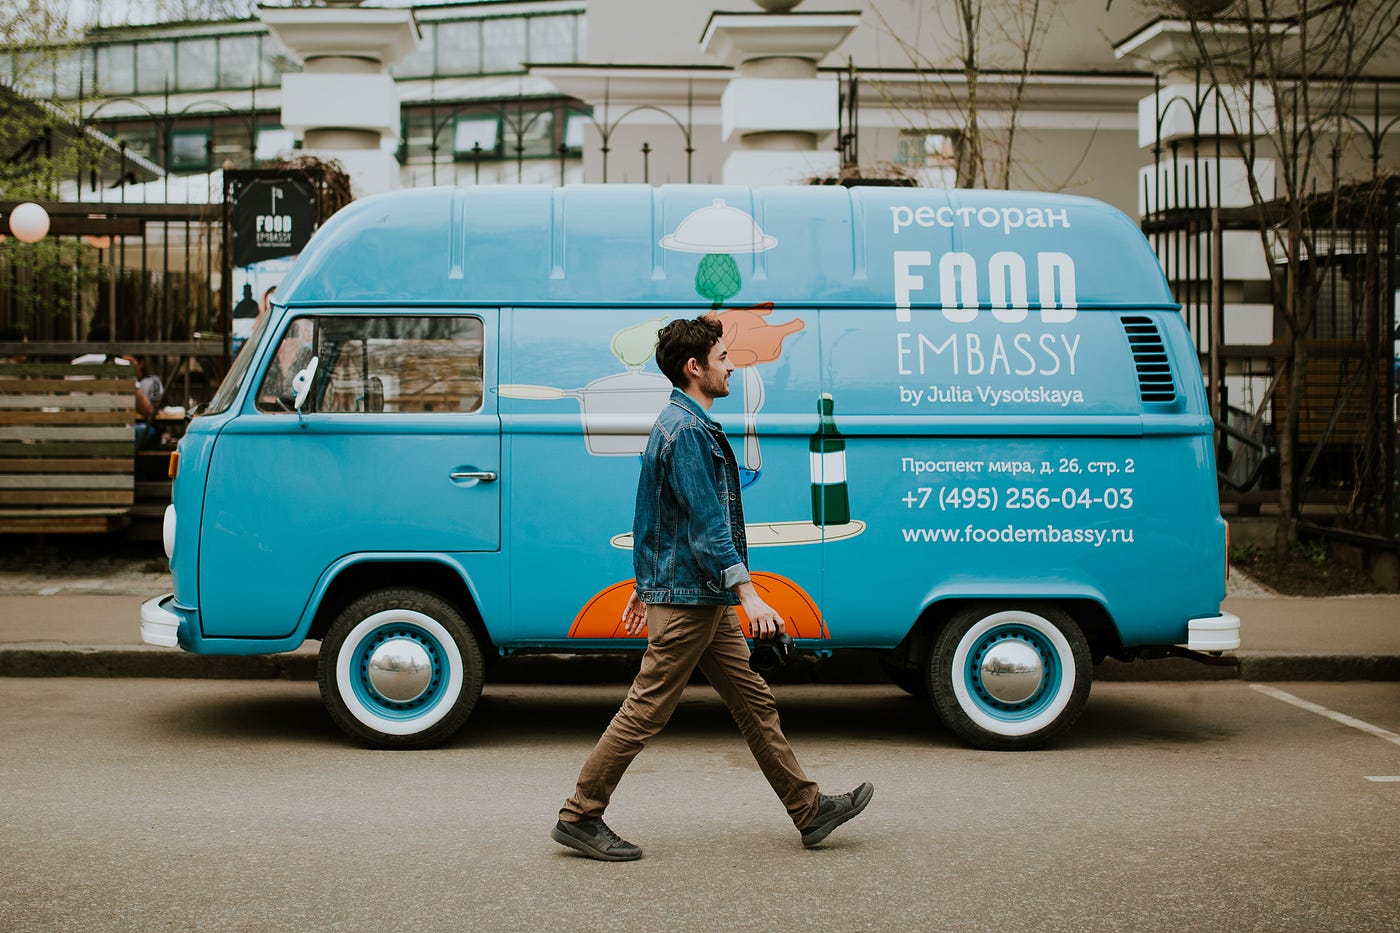 A young man, clad in a jeans jacket and brown pants, walks to the right. Behind him is a light blue food truck with writing on it advertising “Food Embassy.”